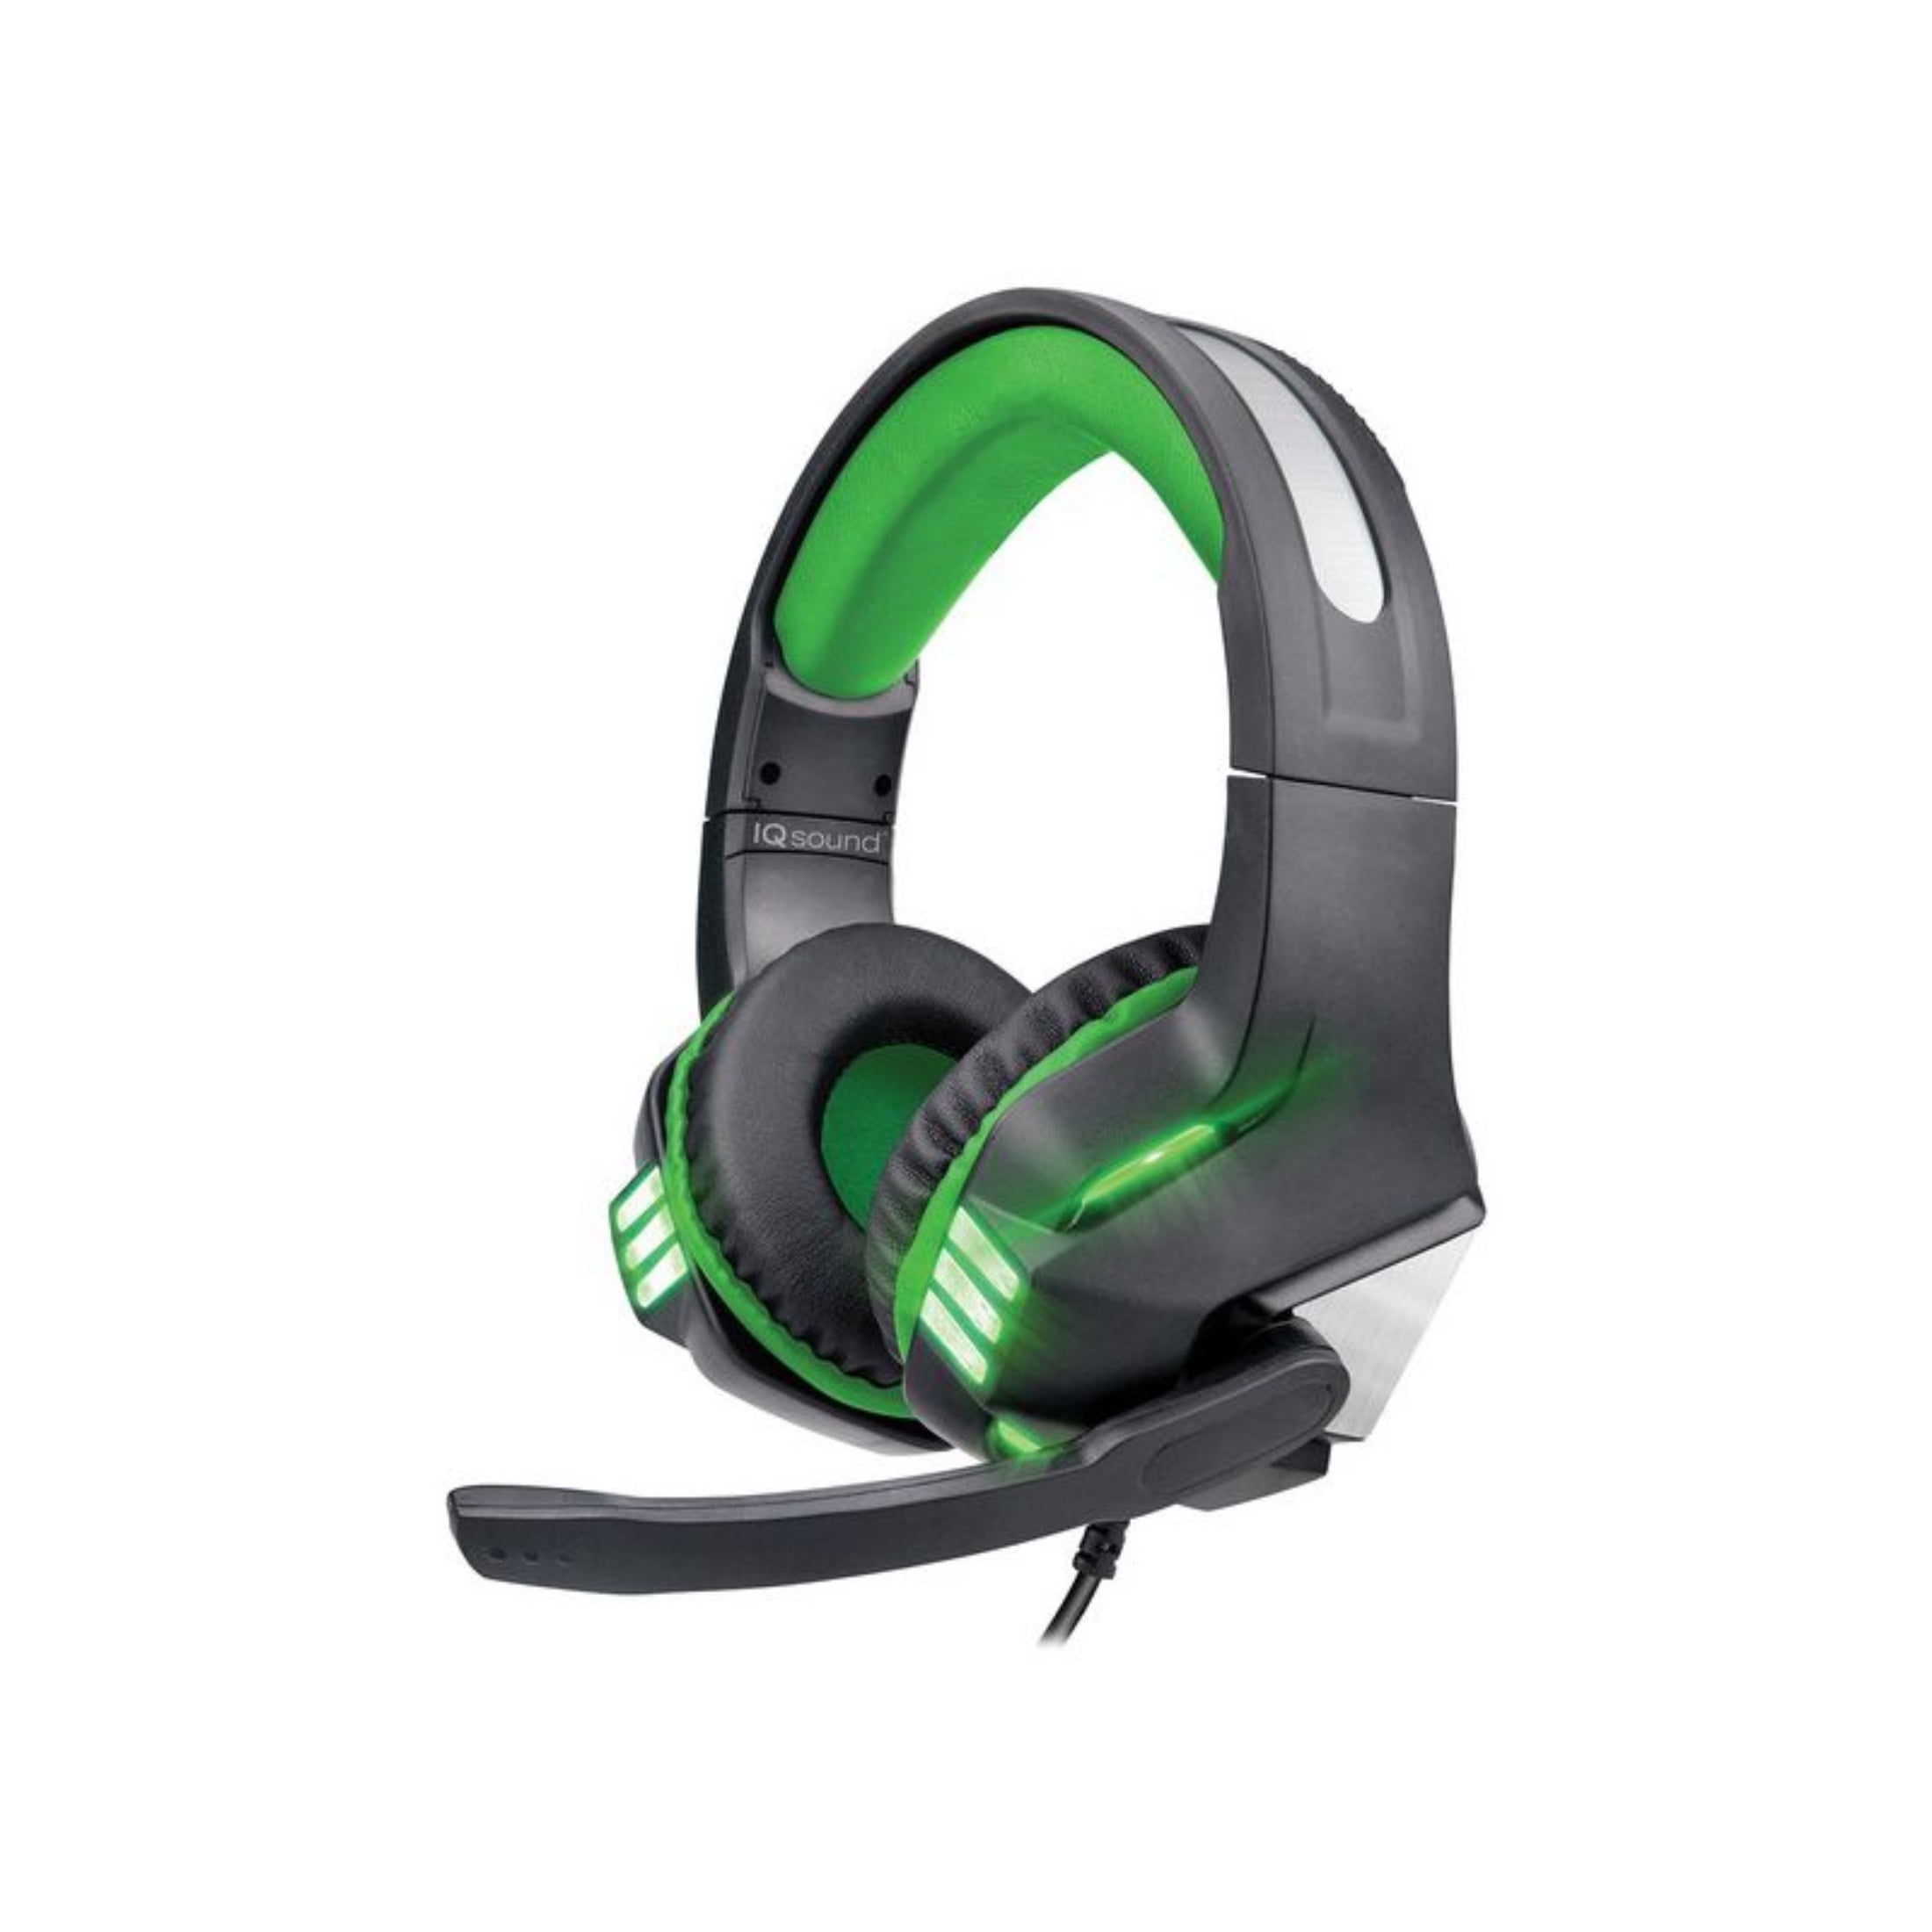 supplere Comorama føderation Pro-Wired Gaming Headset with Great Stereo Surround Sound Effect (IQ-480G)  - Walmart.com